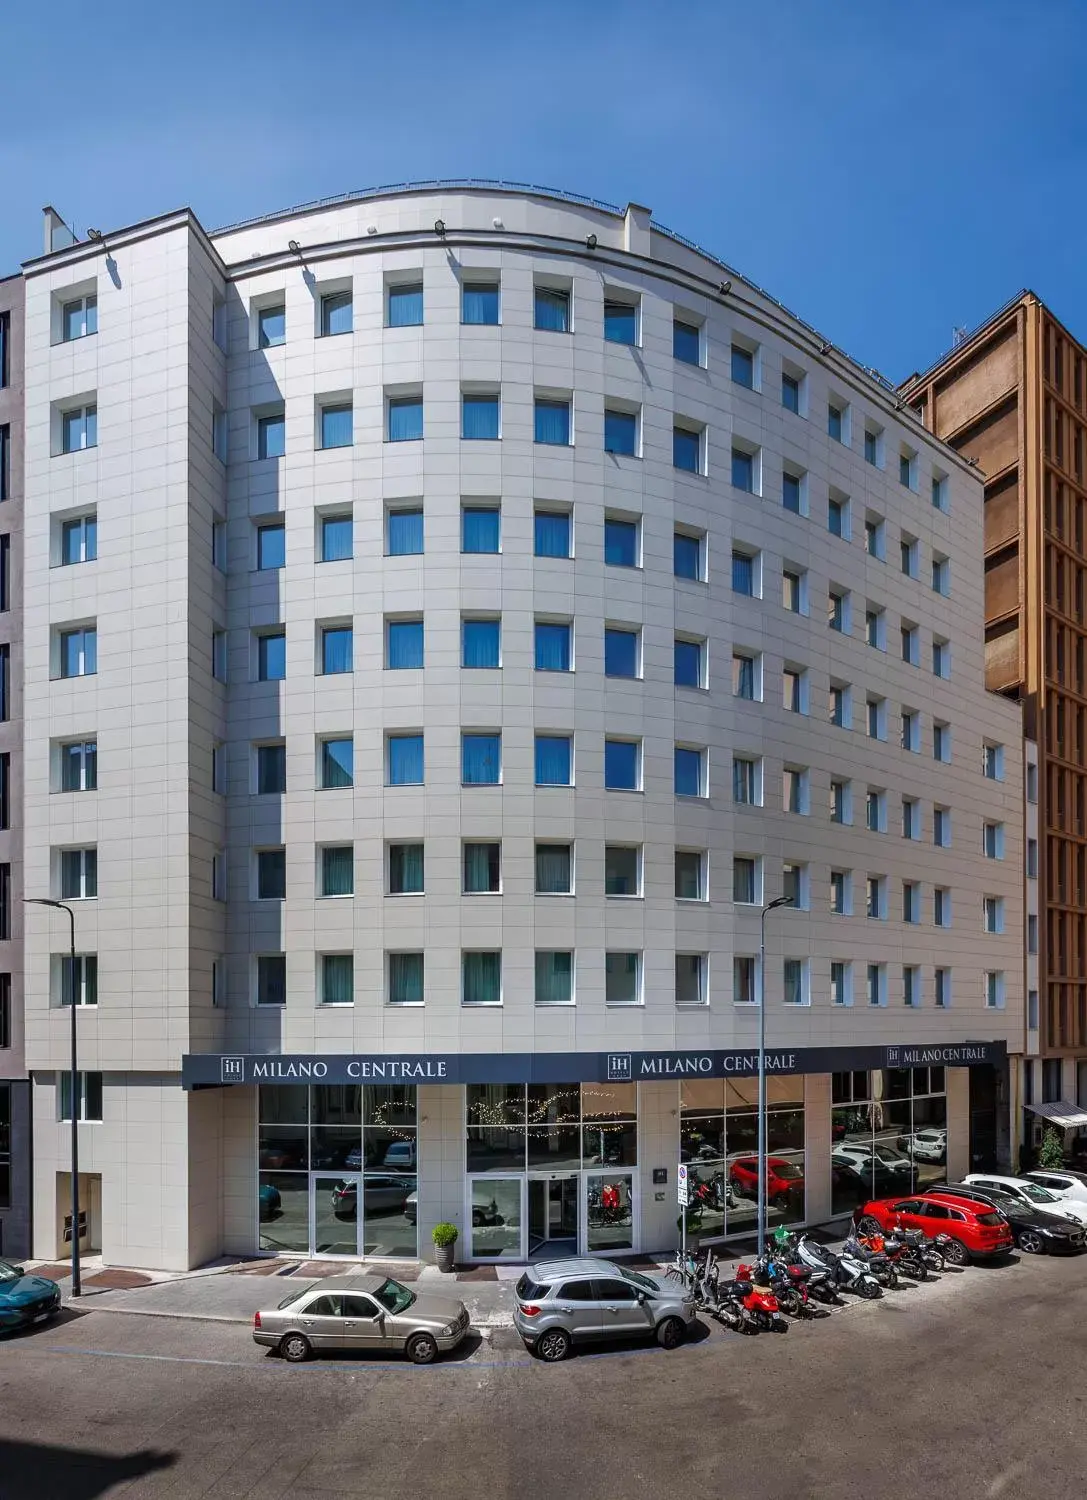 Property Building in IH Hotels Milano Centrale